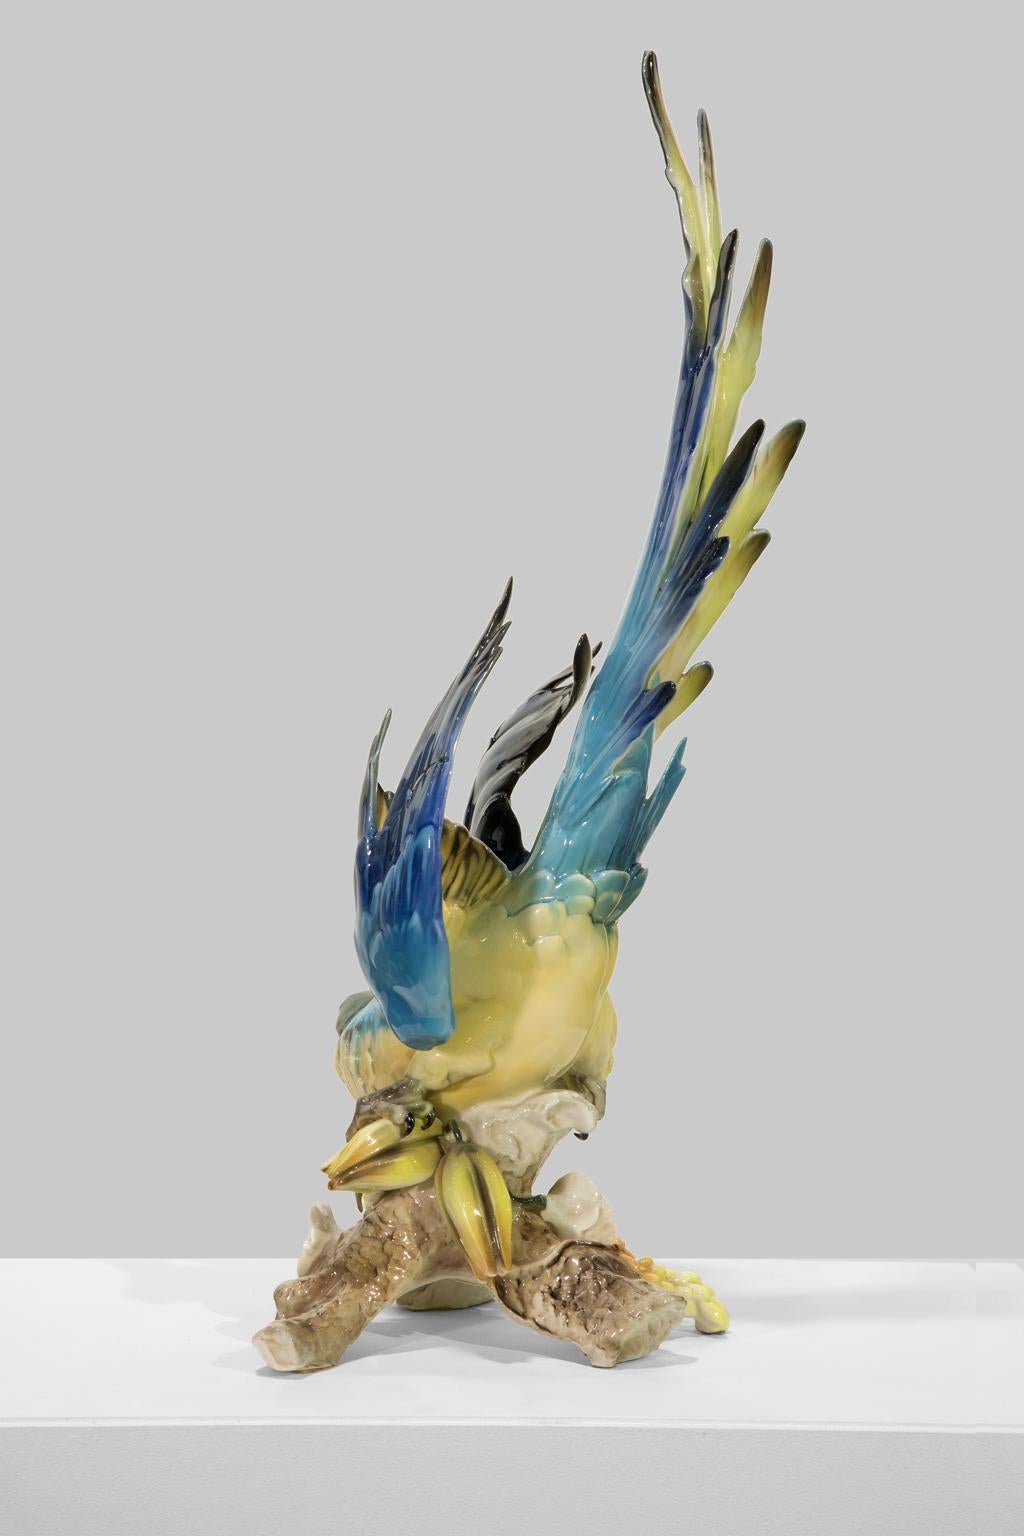 This gorgeous and large porcelain sculpture from Hutschenreuther porcelain is of a a majestic blue-and-gold macaw, a neotropical parrot prized for its intelligence and striking colors, perched on a flowering branch, blue wings and tail outstretched.